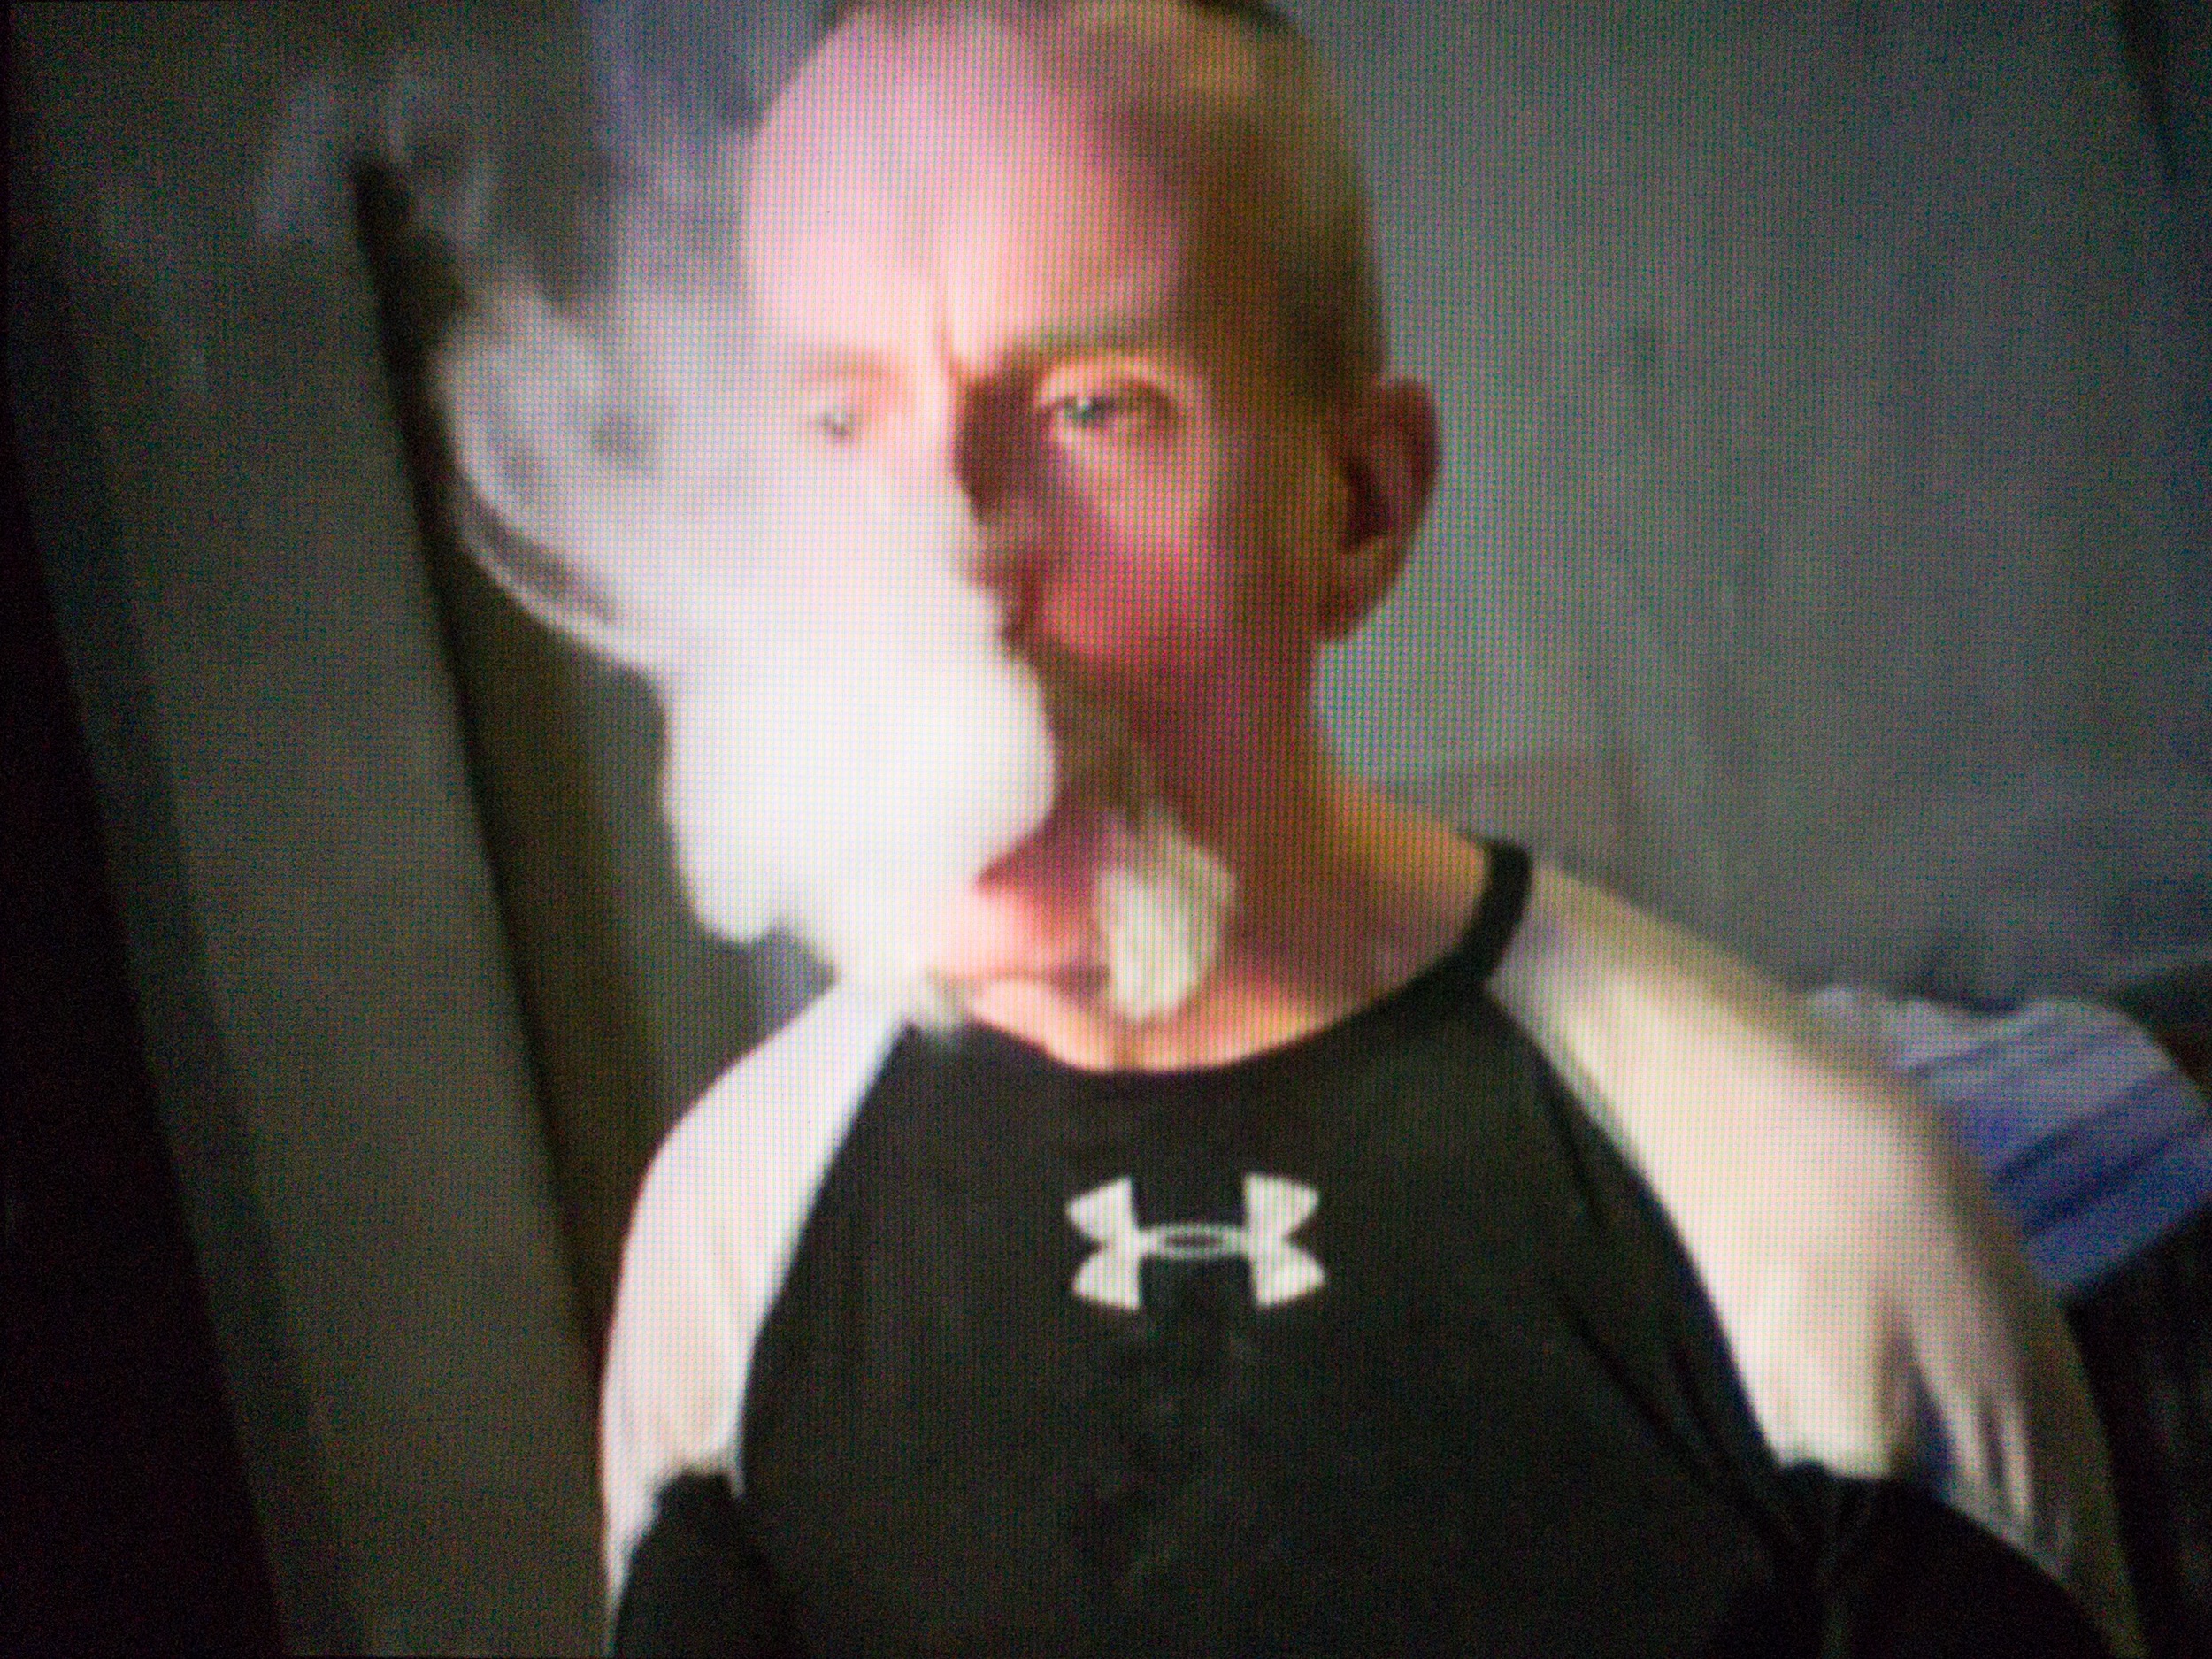 A middle-aged man with a grey horseshoe moustache and a black and white sweater sits in a darkened room. He is staring off into space to the side of the camera while blowing smoke, which is drifting upward and obscuring a third of his face.